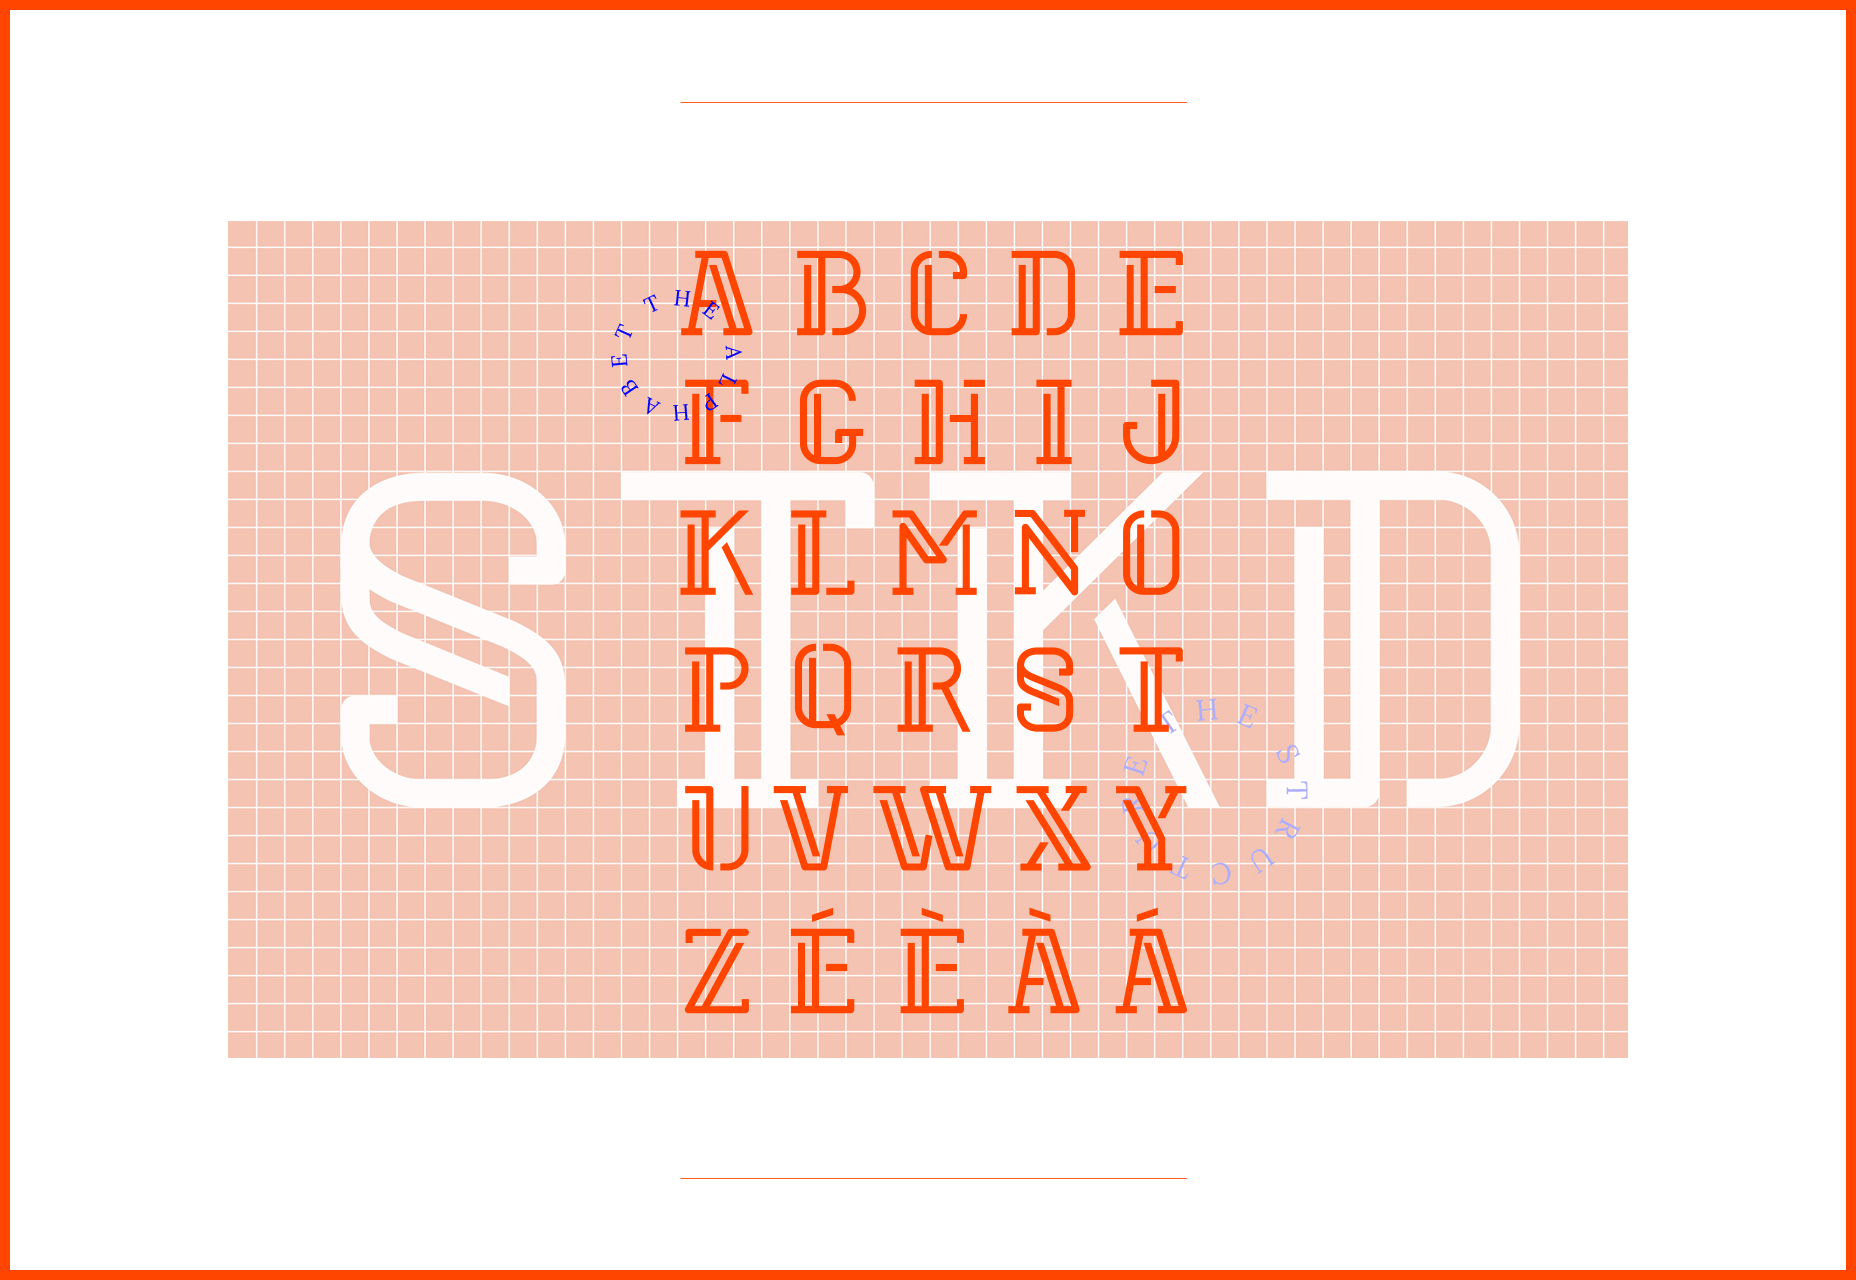 stoked-side-offset-featured-typeface